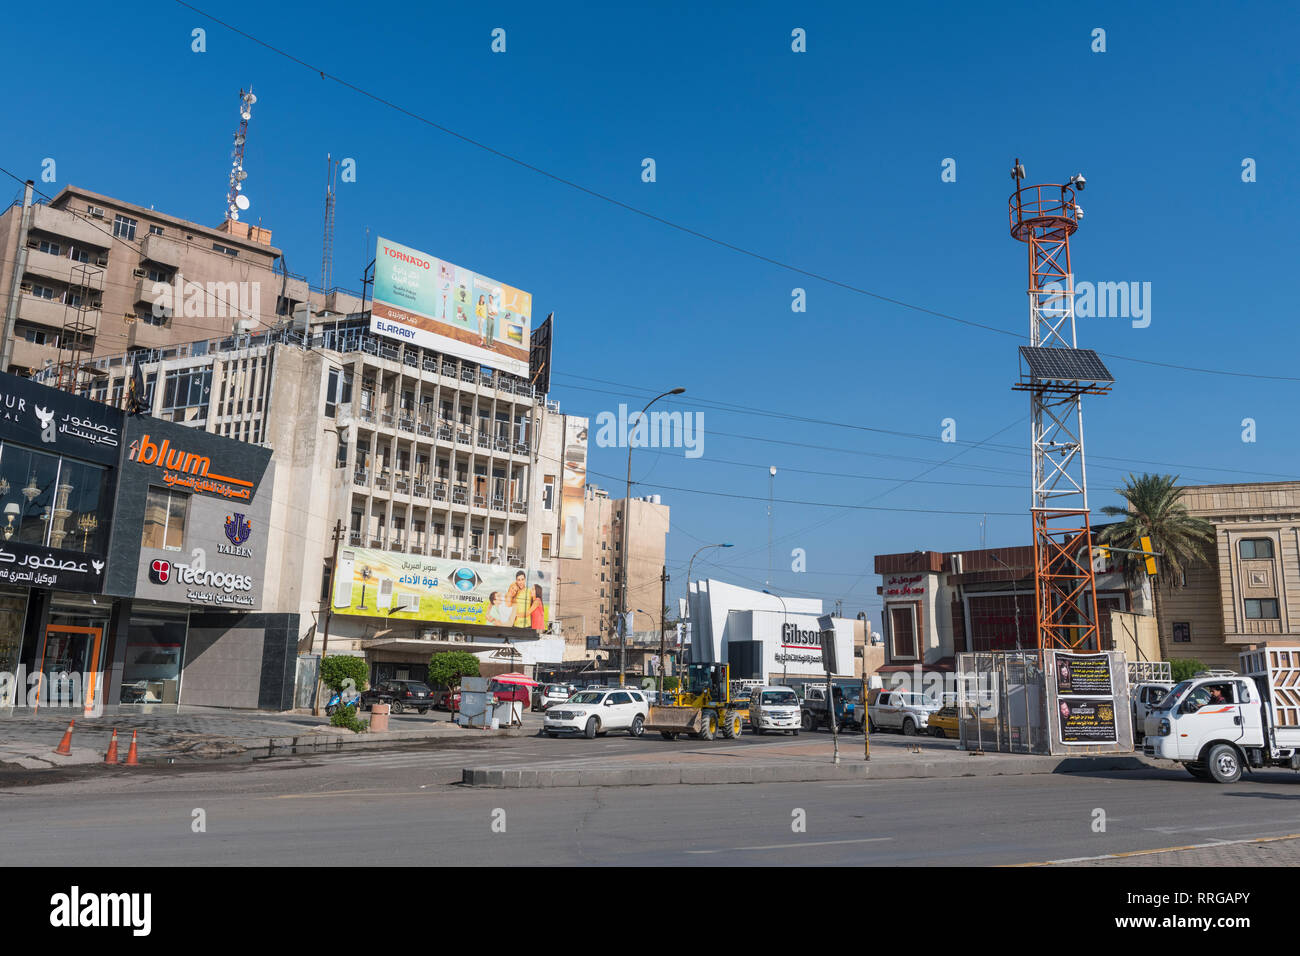 Business district, Bagdad, Iraq, Middle East Banque D'Images